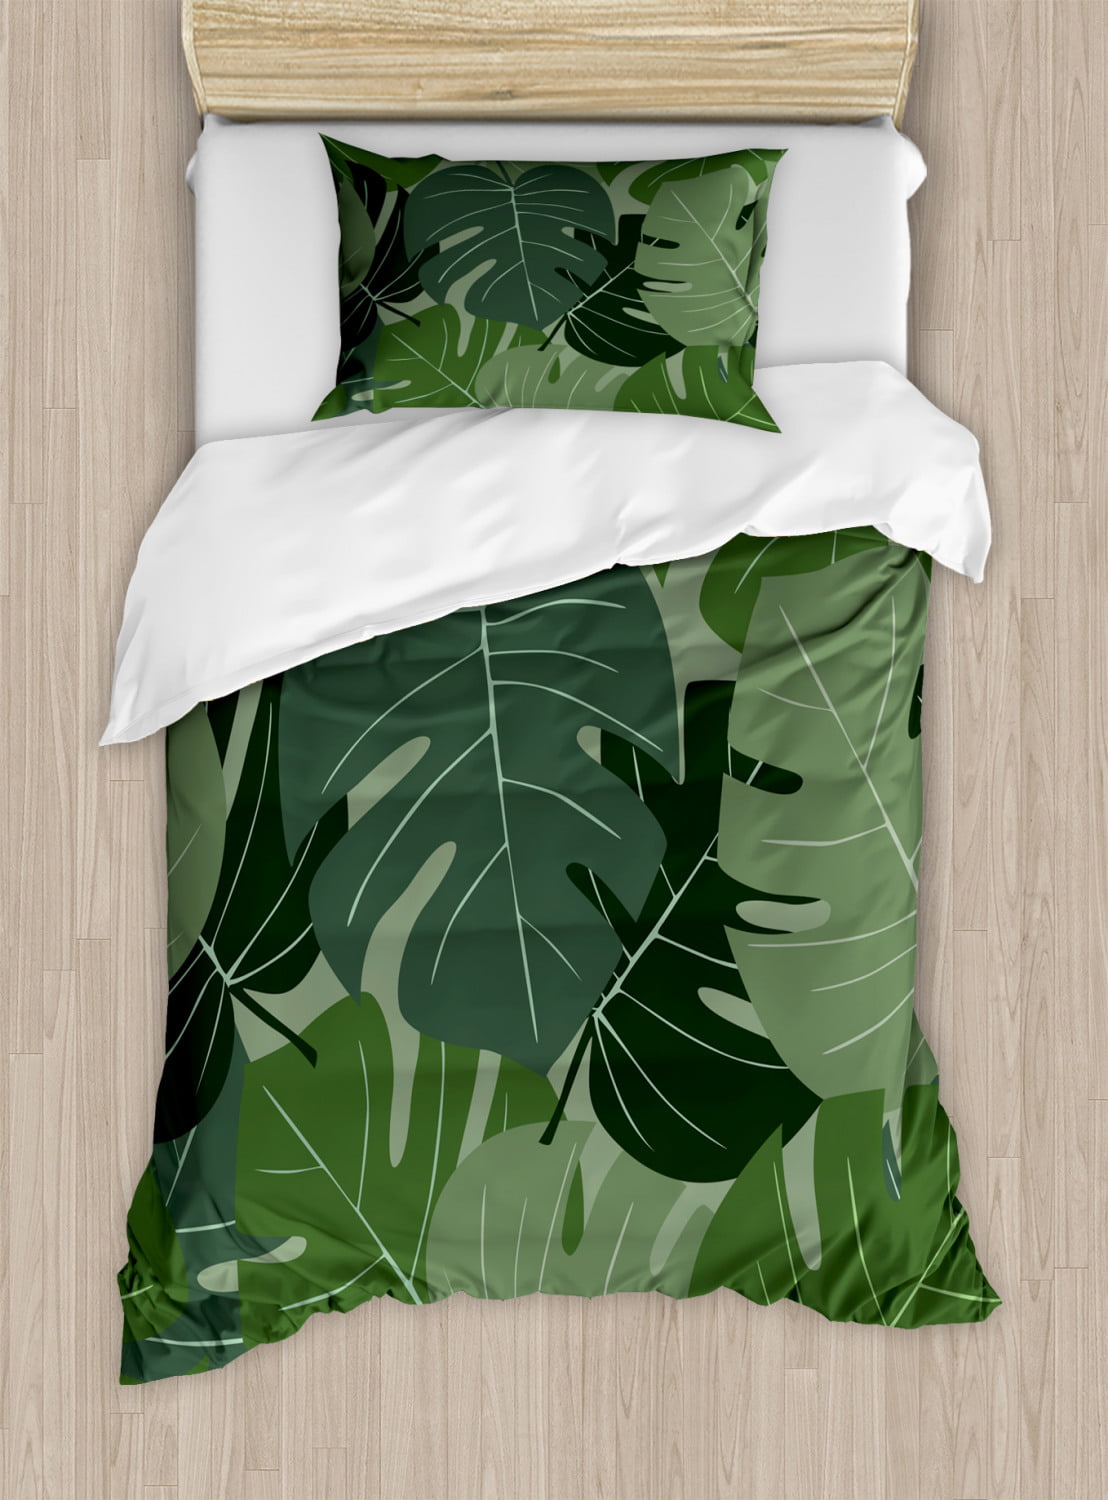 Forest Green Duvet Cover Set Twin Size, Forest Twin Bed Sheets